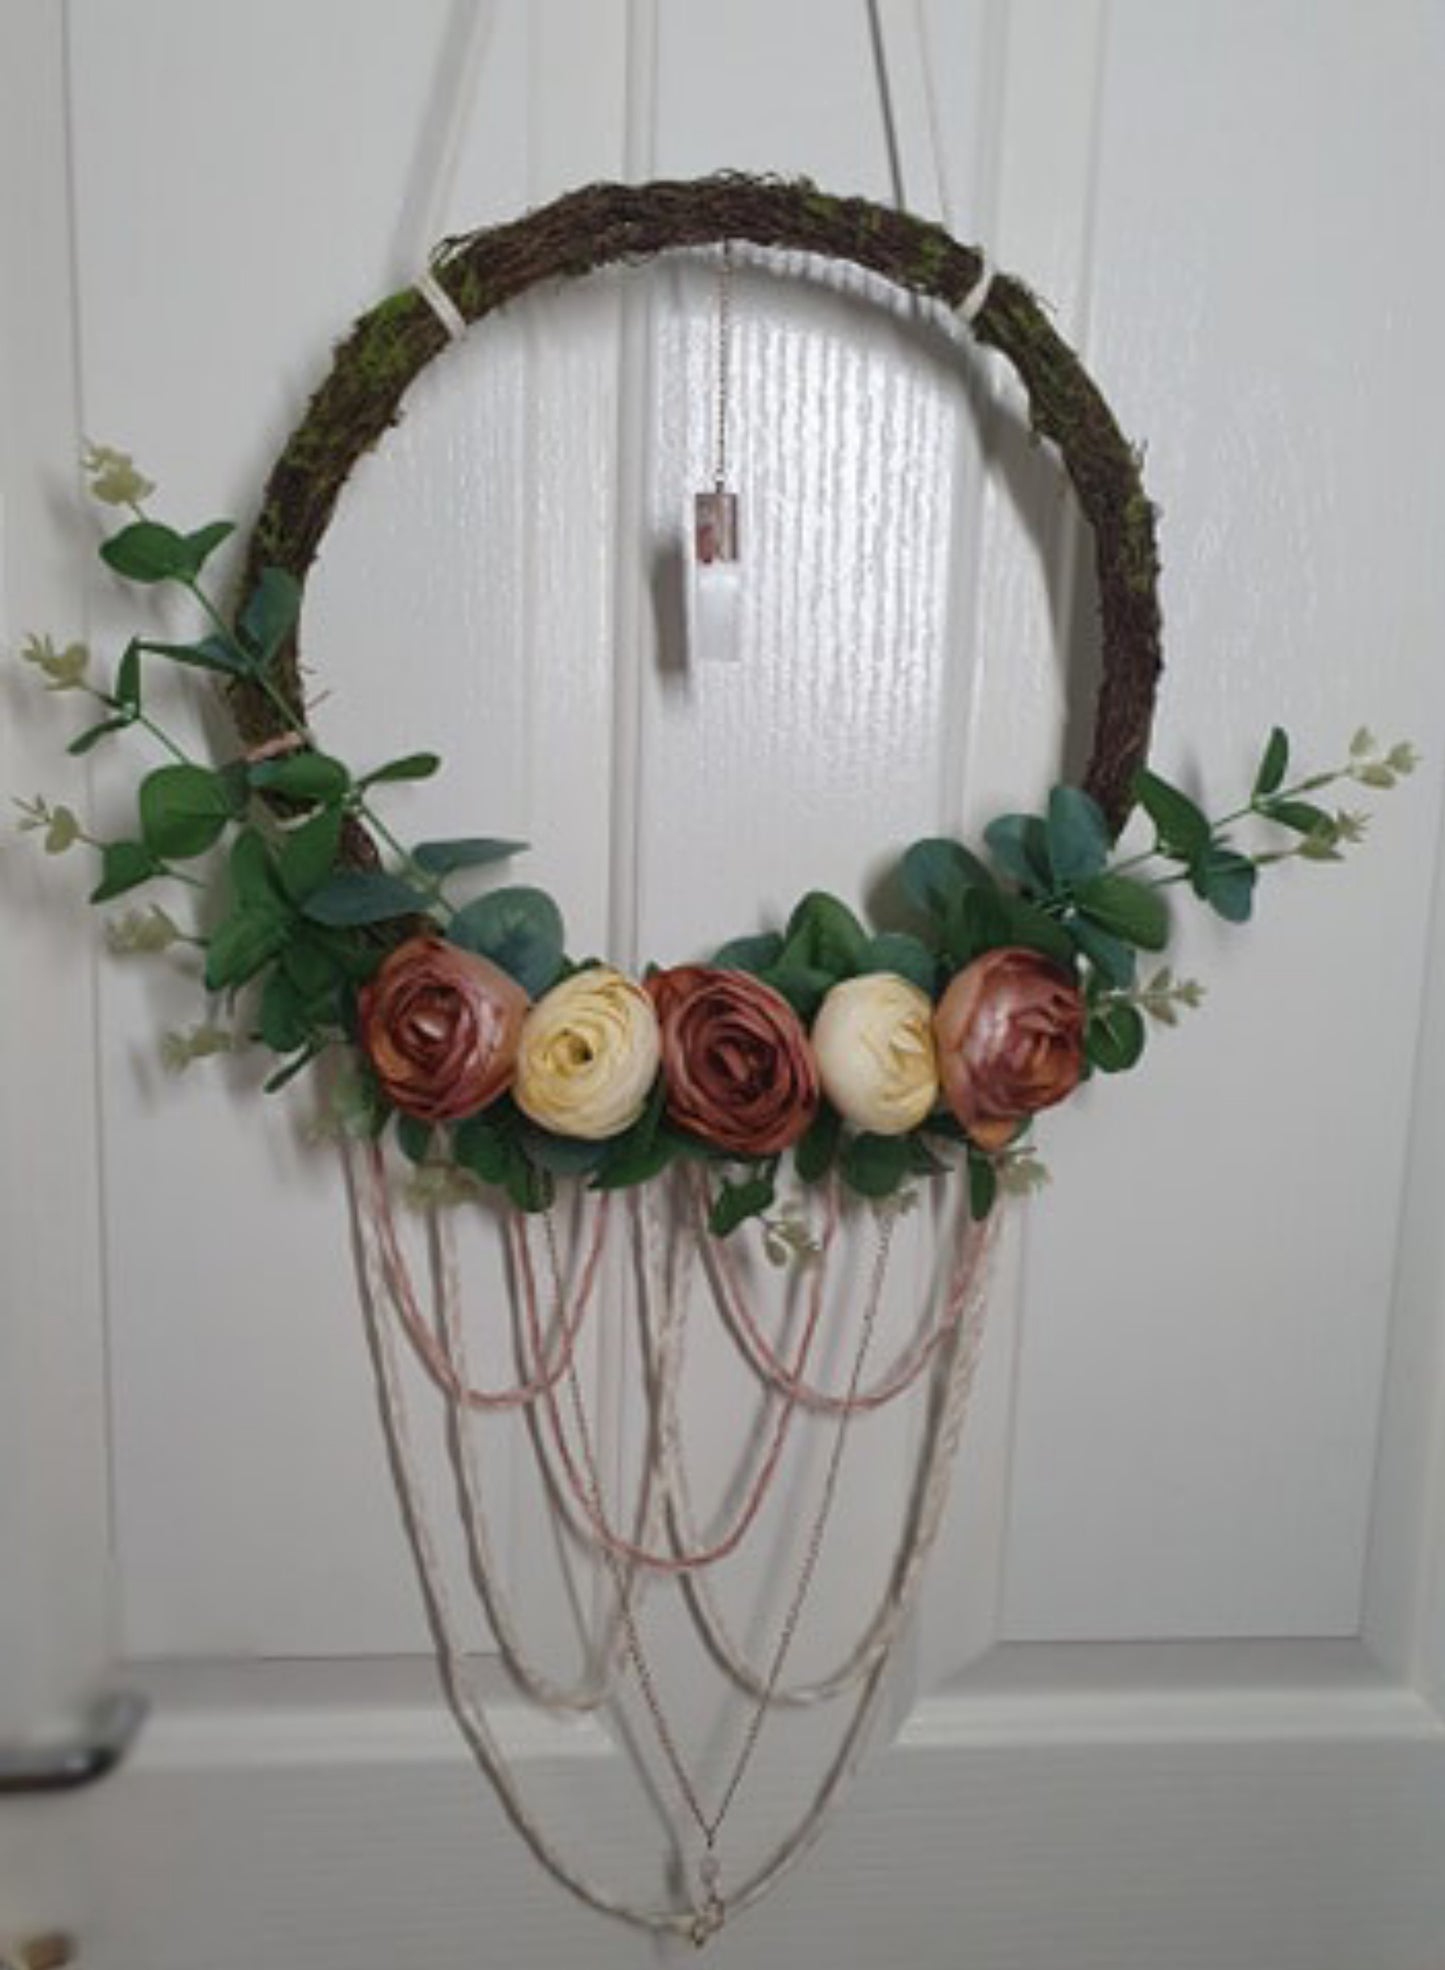 Stunning Rose and Crystal Wreath